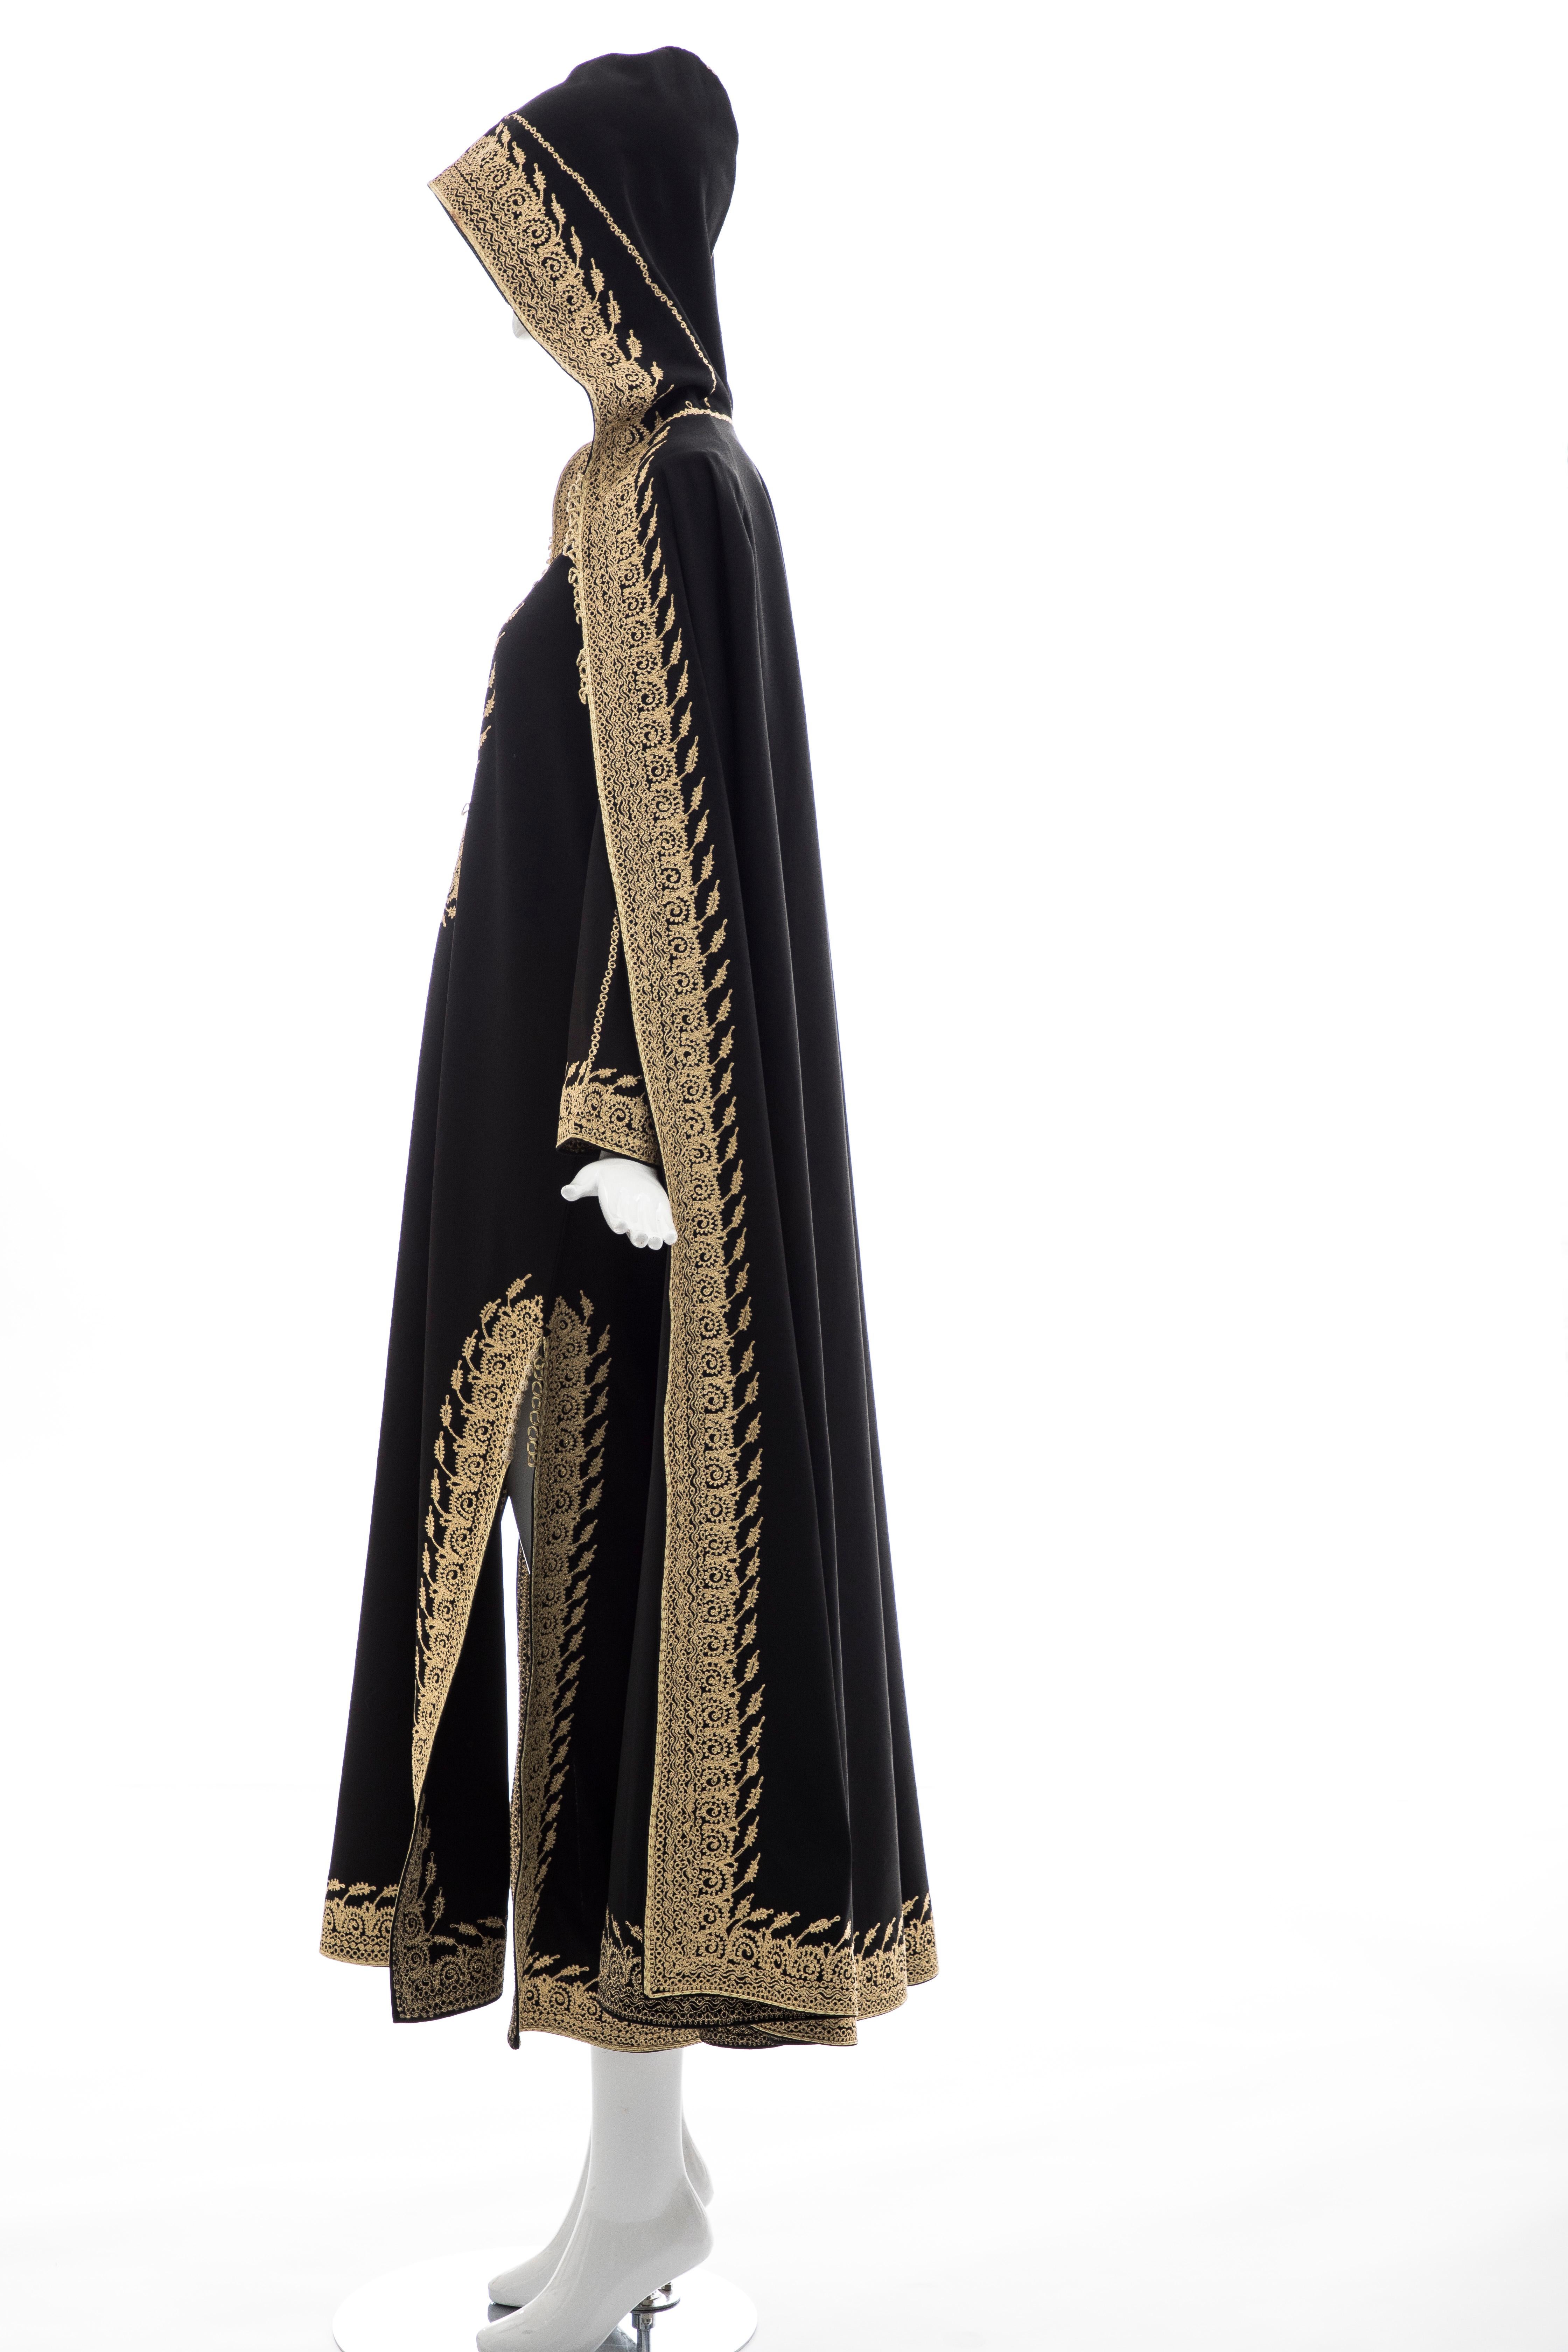 Women's Moroccan Black Kaftan With Gold Embroidery Separate Hooded Cape, Circa 1970's